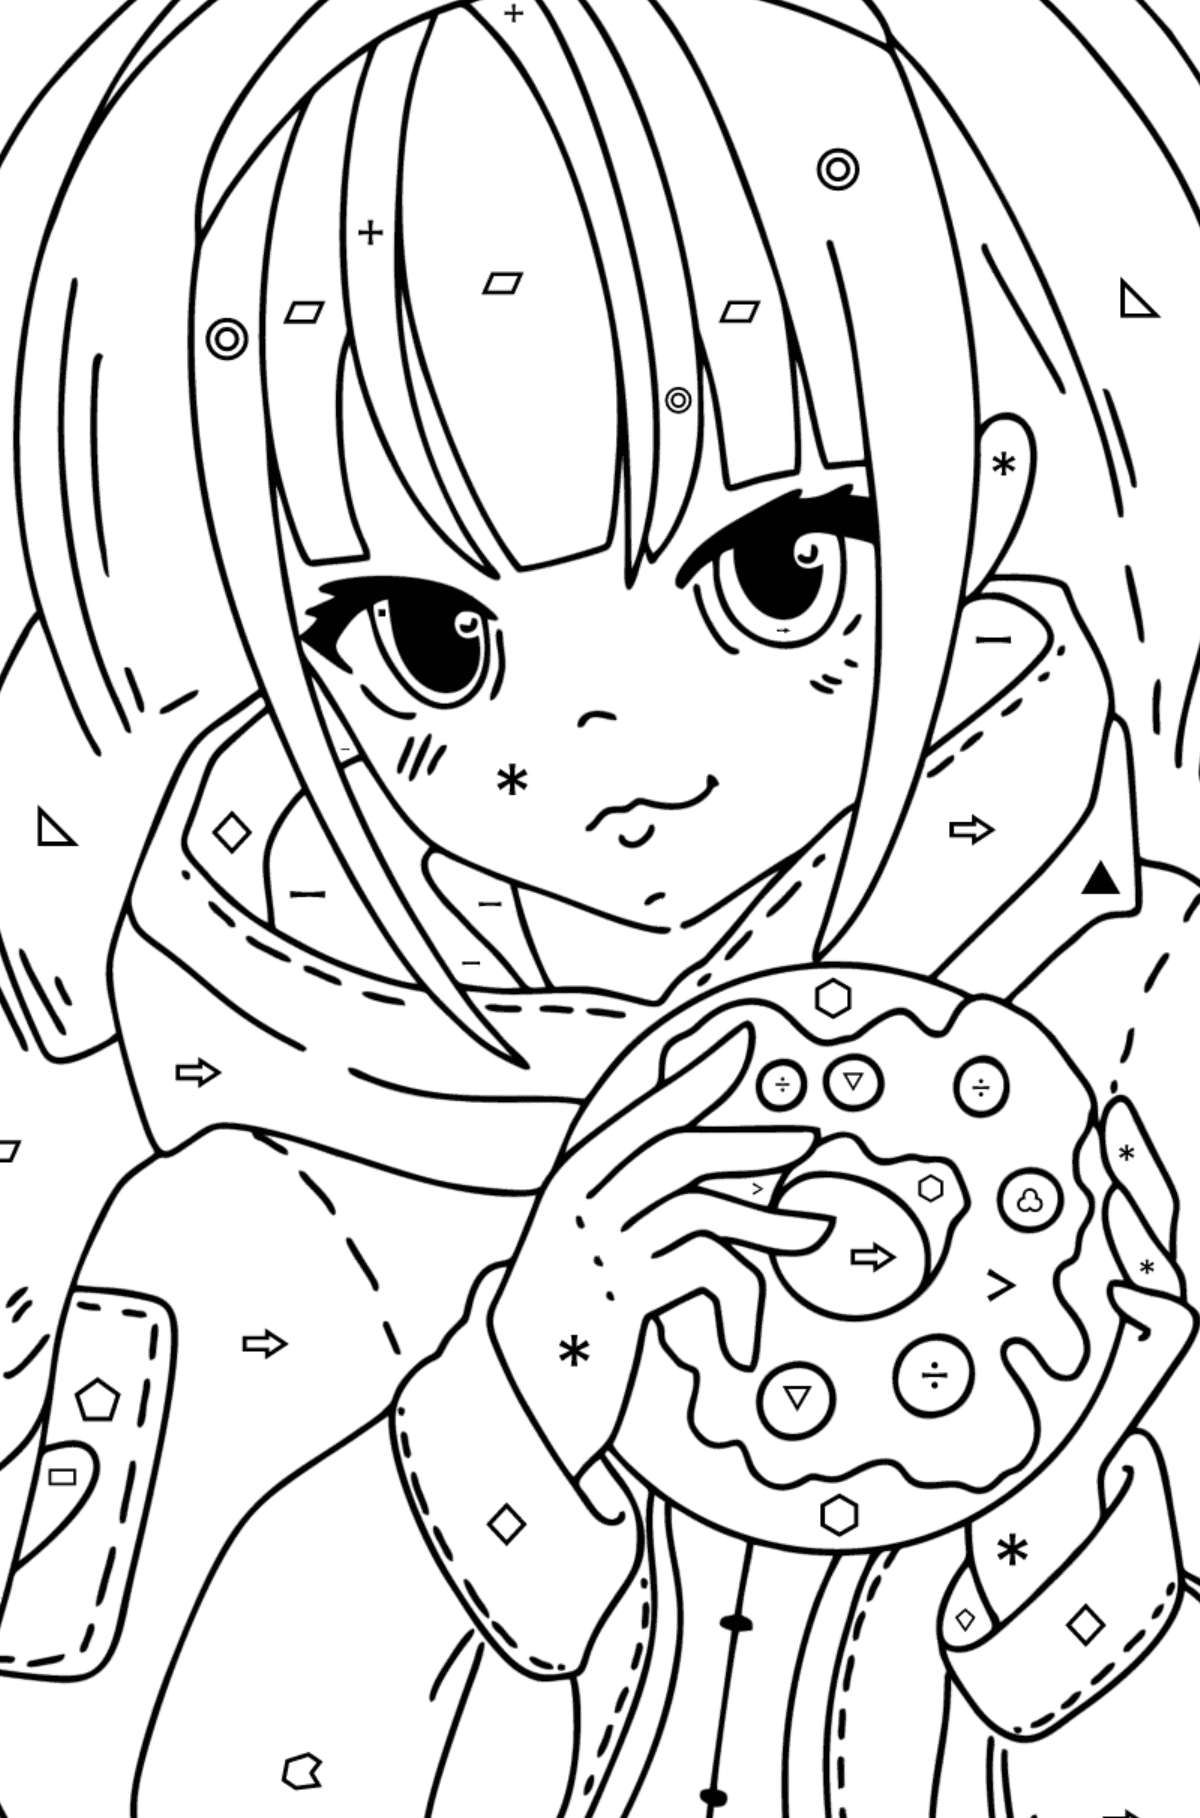 Japanese anime girl coloring page - Coloring by Symbols and Geometric Shapes for Kids